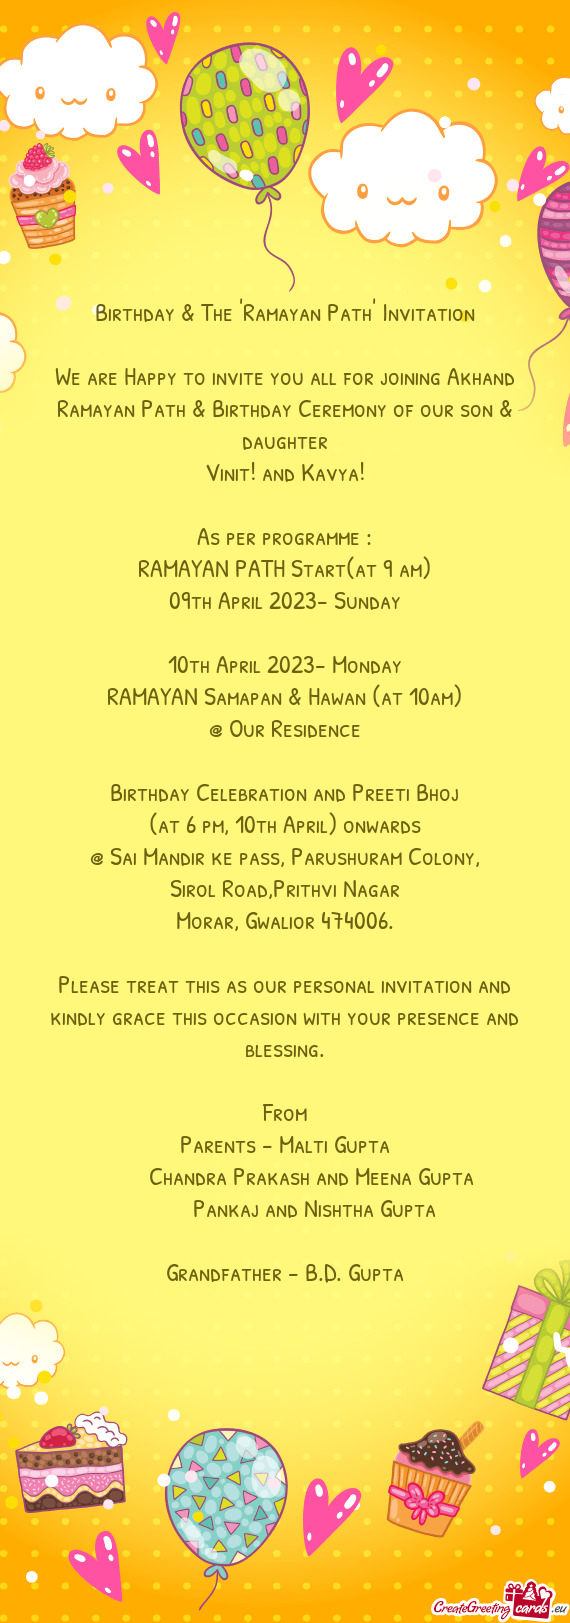 We are Happy to invite you all for joining Akhand Ramayan Path & Birthday Ceremony of our son & daug